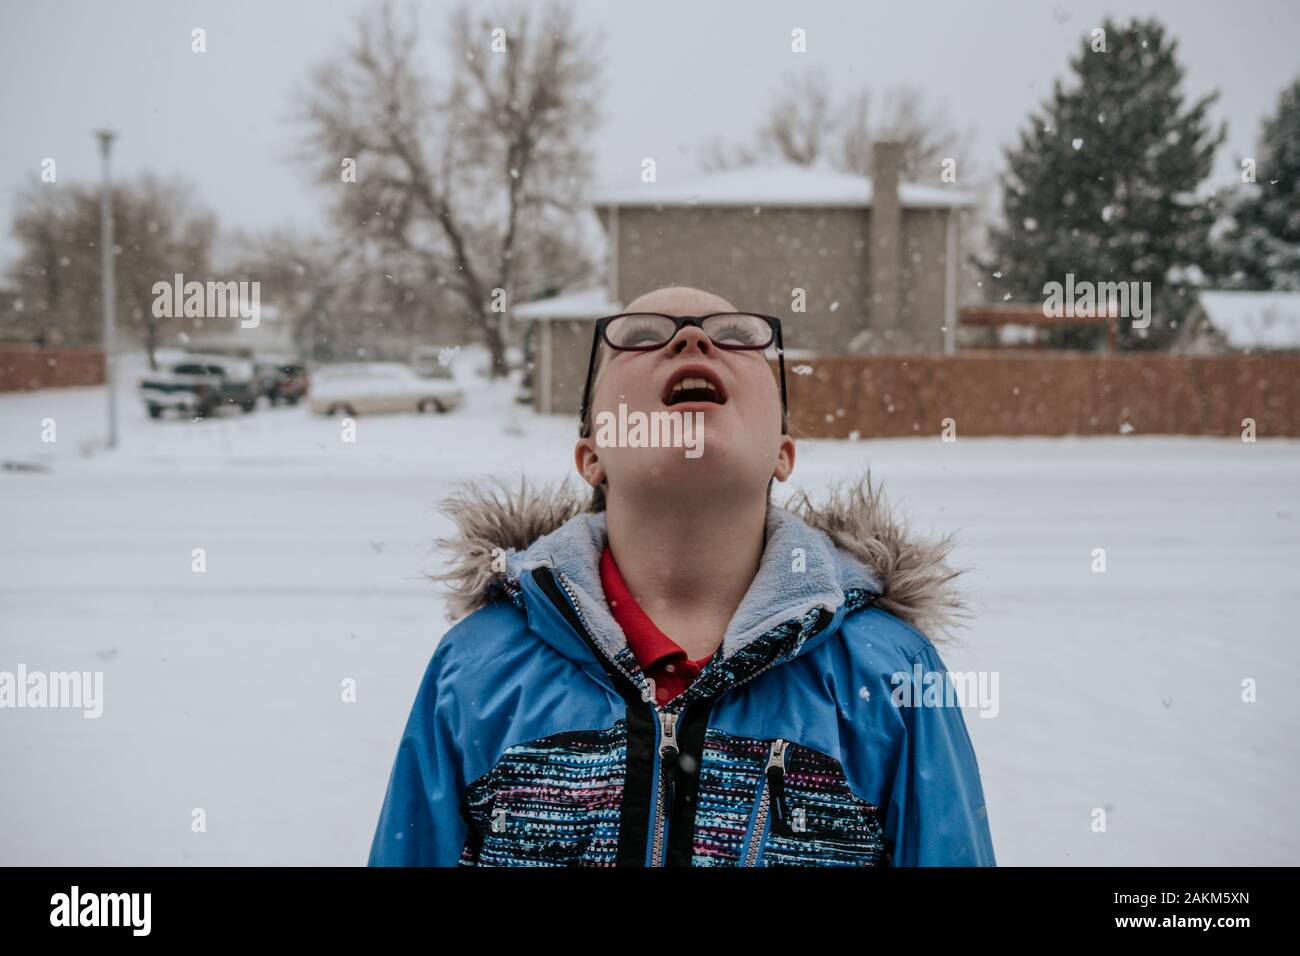 portrait of a girl looking up while it is snowing in front yard Stock Photo